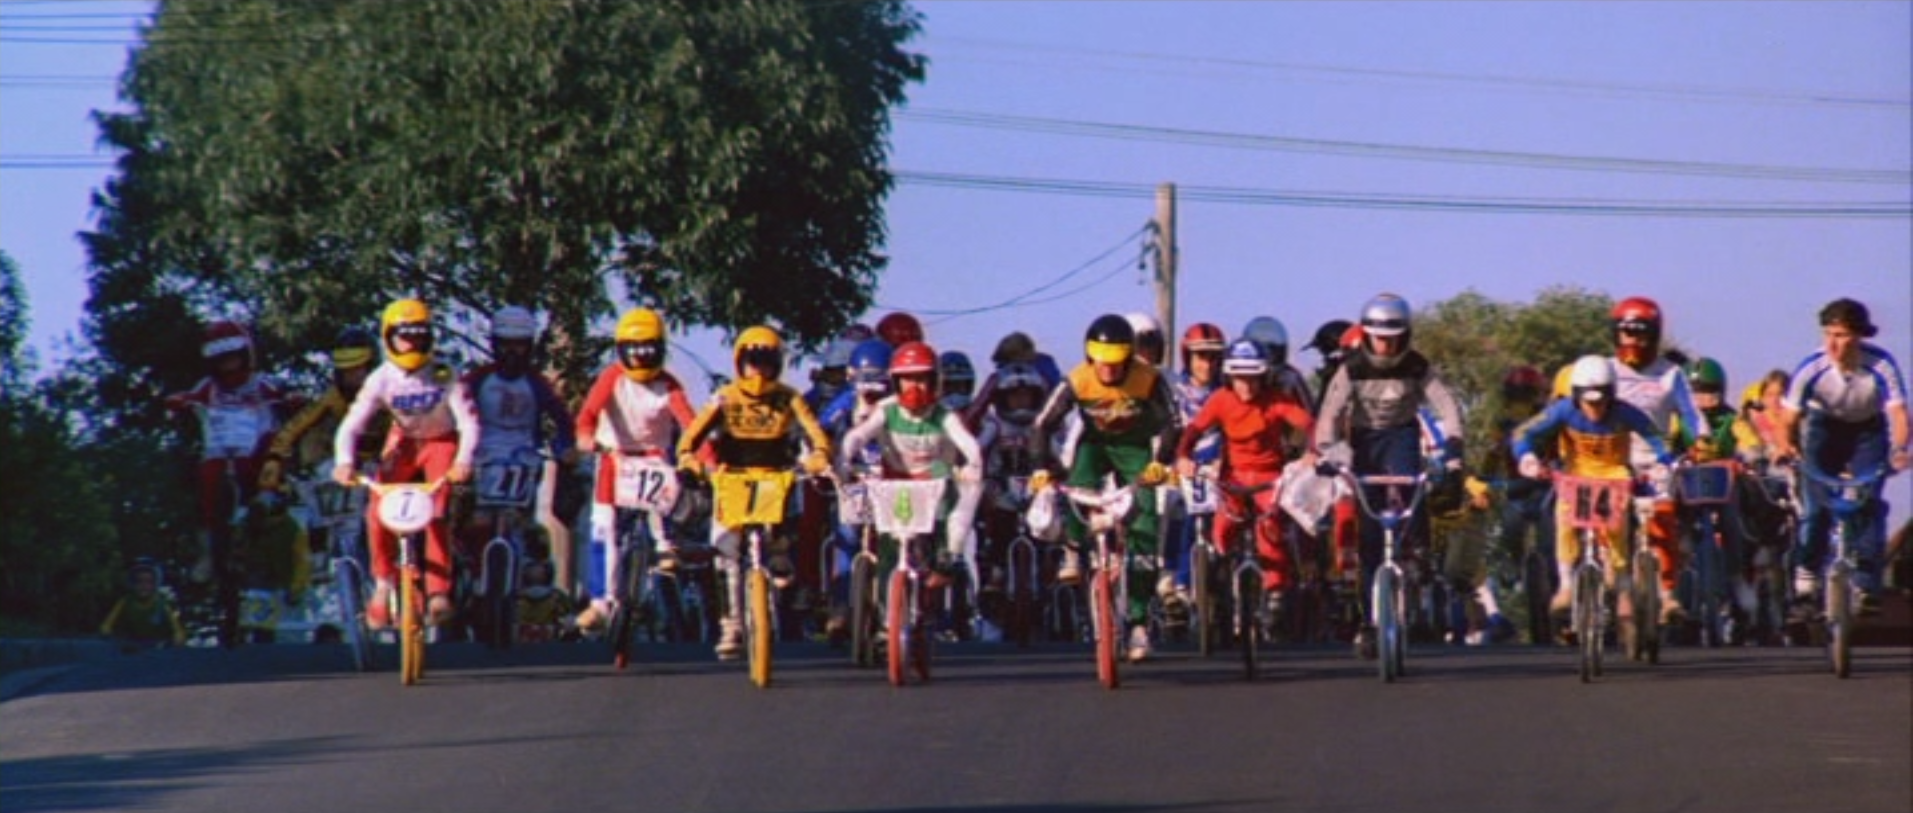 Bmx Bandits Features Australians On Bmx Bikes By Ant Every Day Is Movies Medium